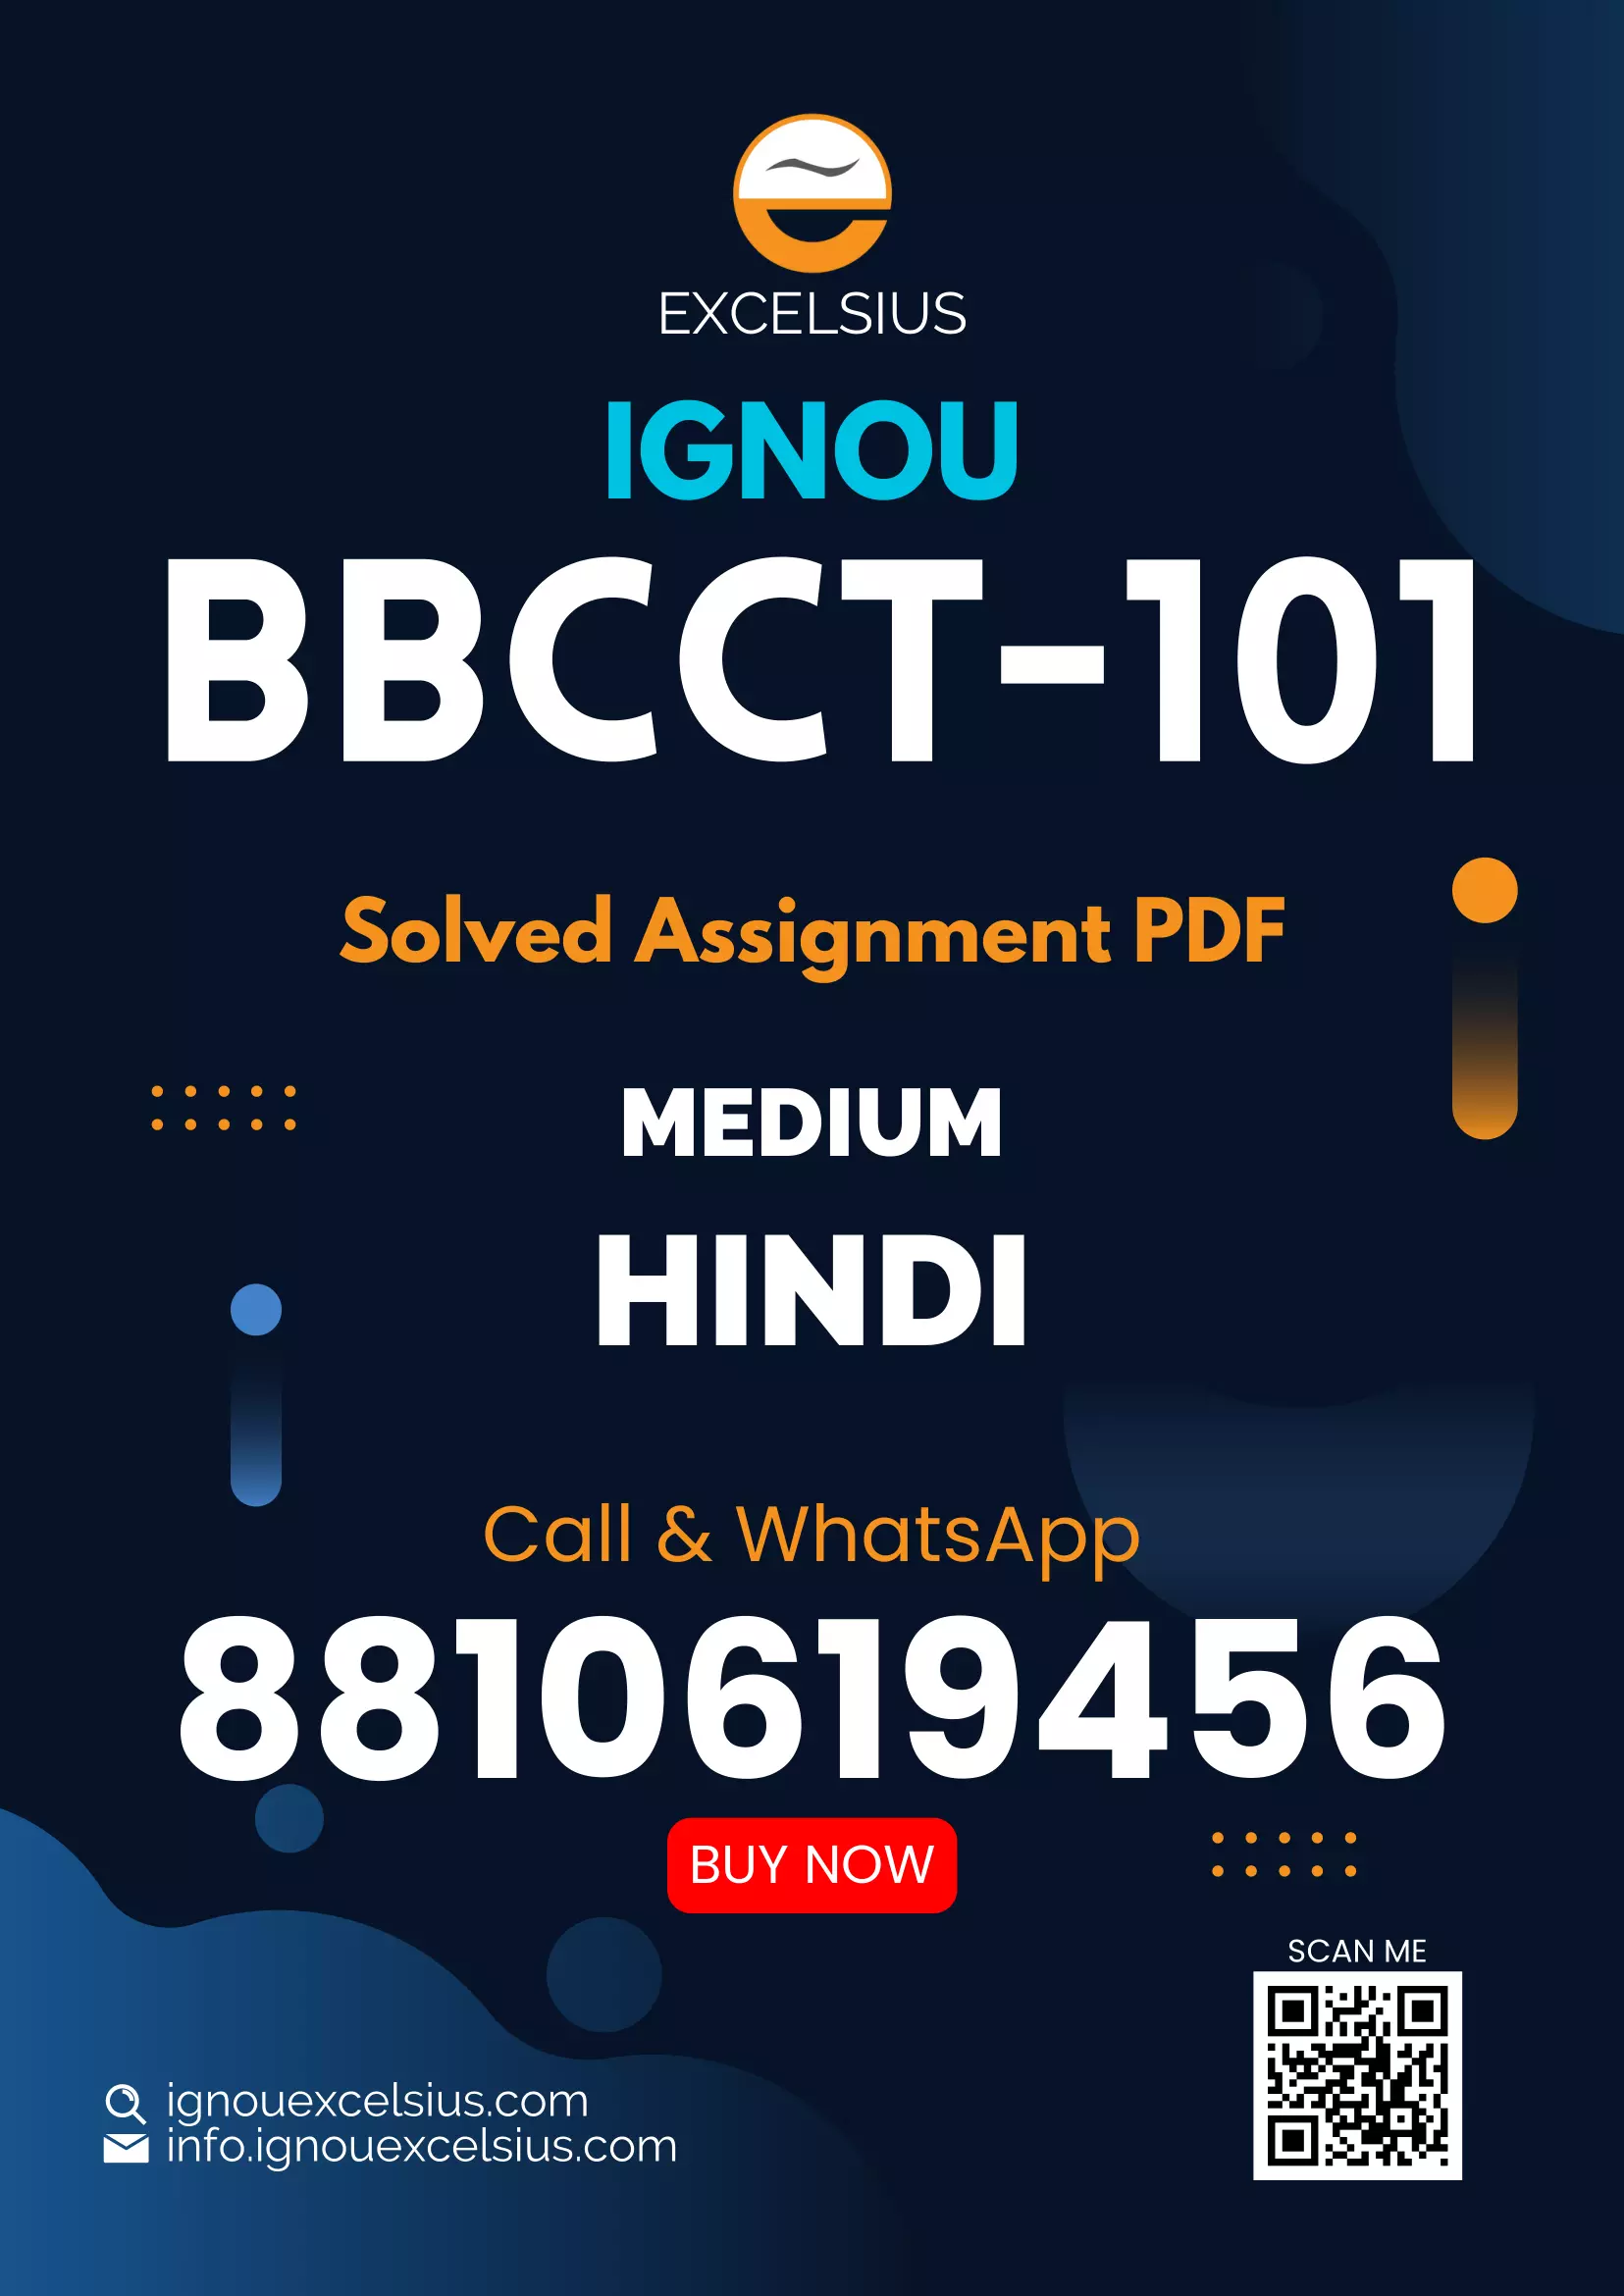 IGNOU BBCCT-101 - Molecules of Life, Latest Solved Assignment-January 2023 - December 2023